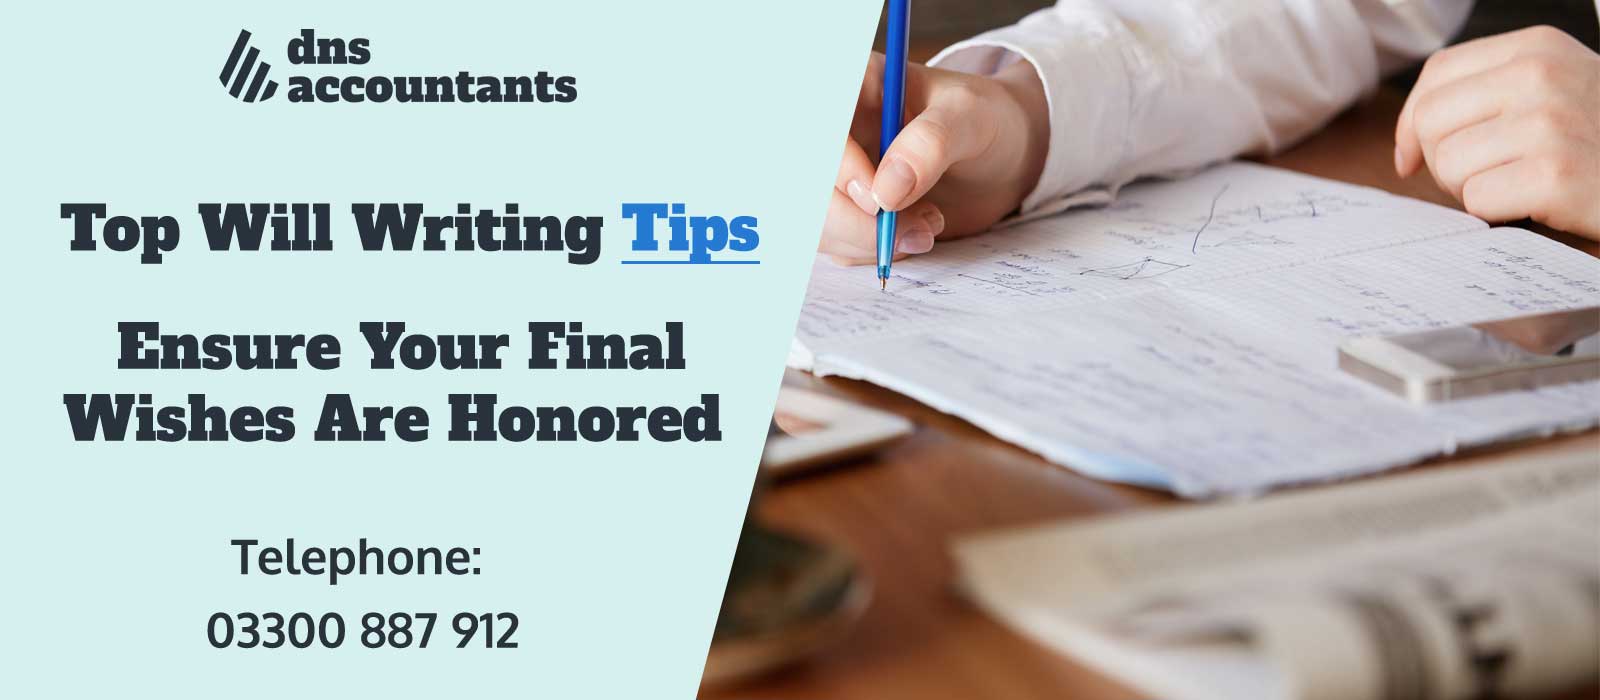 Top Will Writing Tips – Ensure Your Final Wishes Are Honored